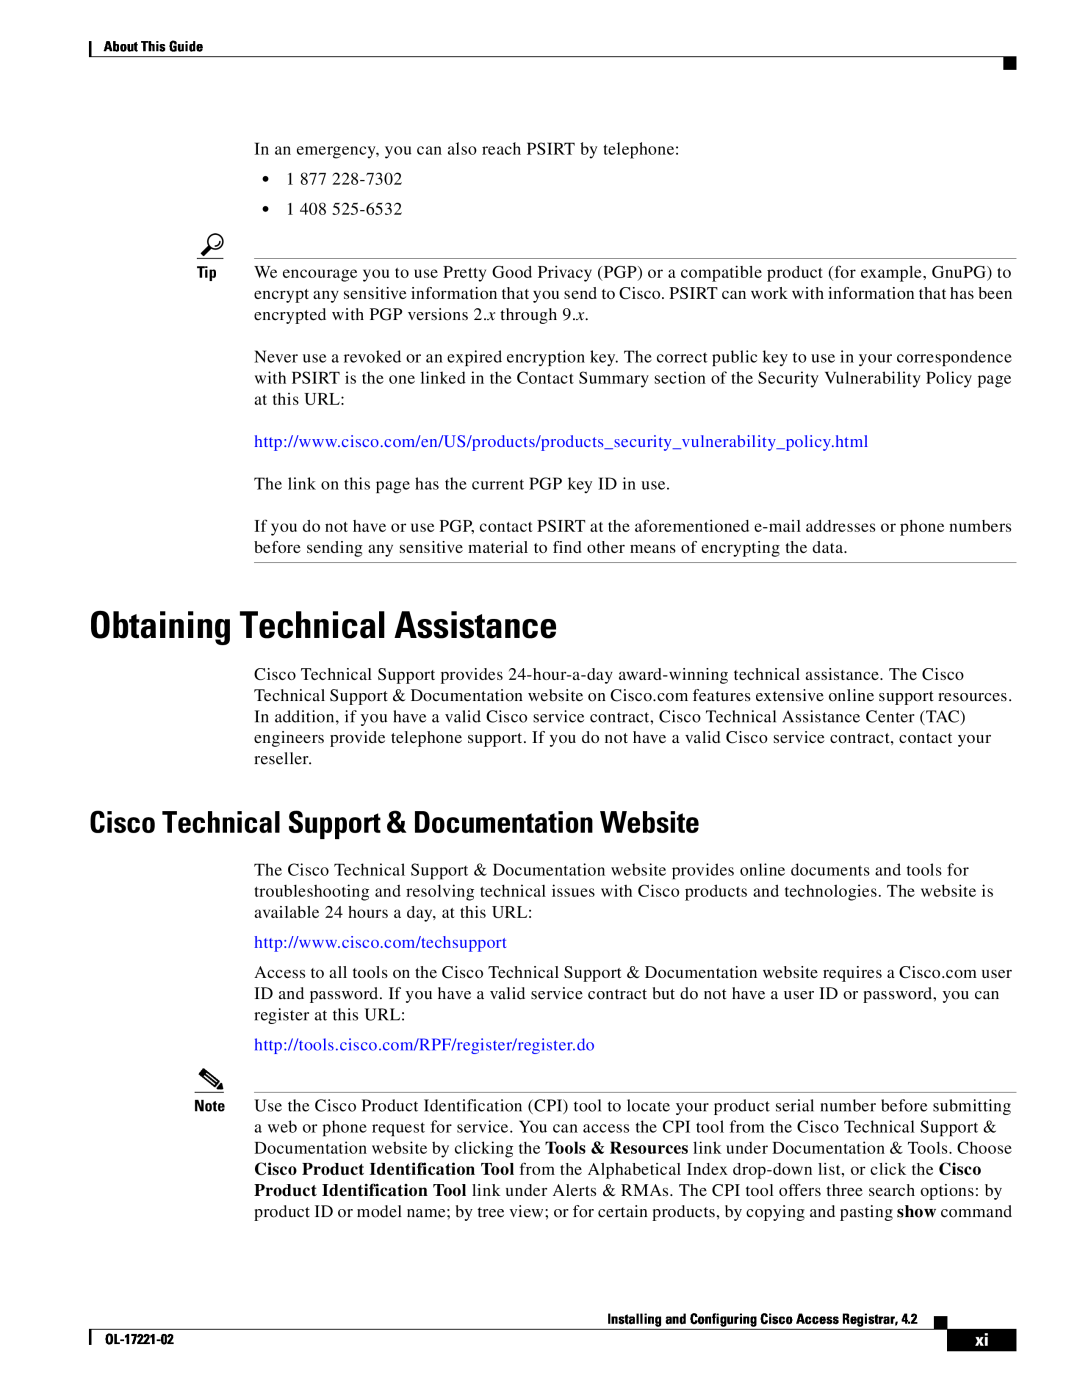 Cisco Systems 4.2 manual Obtaining Technical Assistance, Cisco Technical Support & Documentation Website 